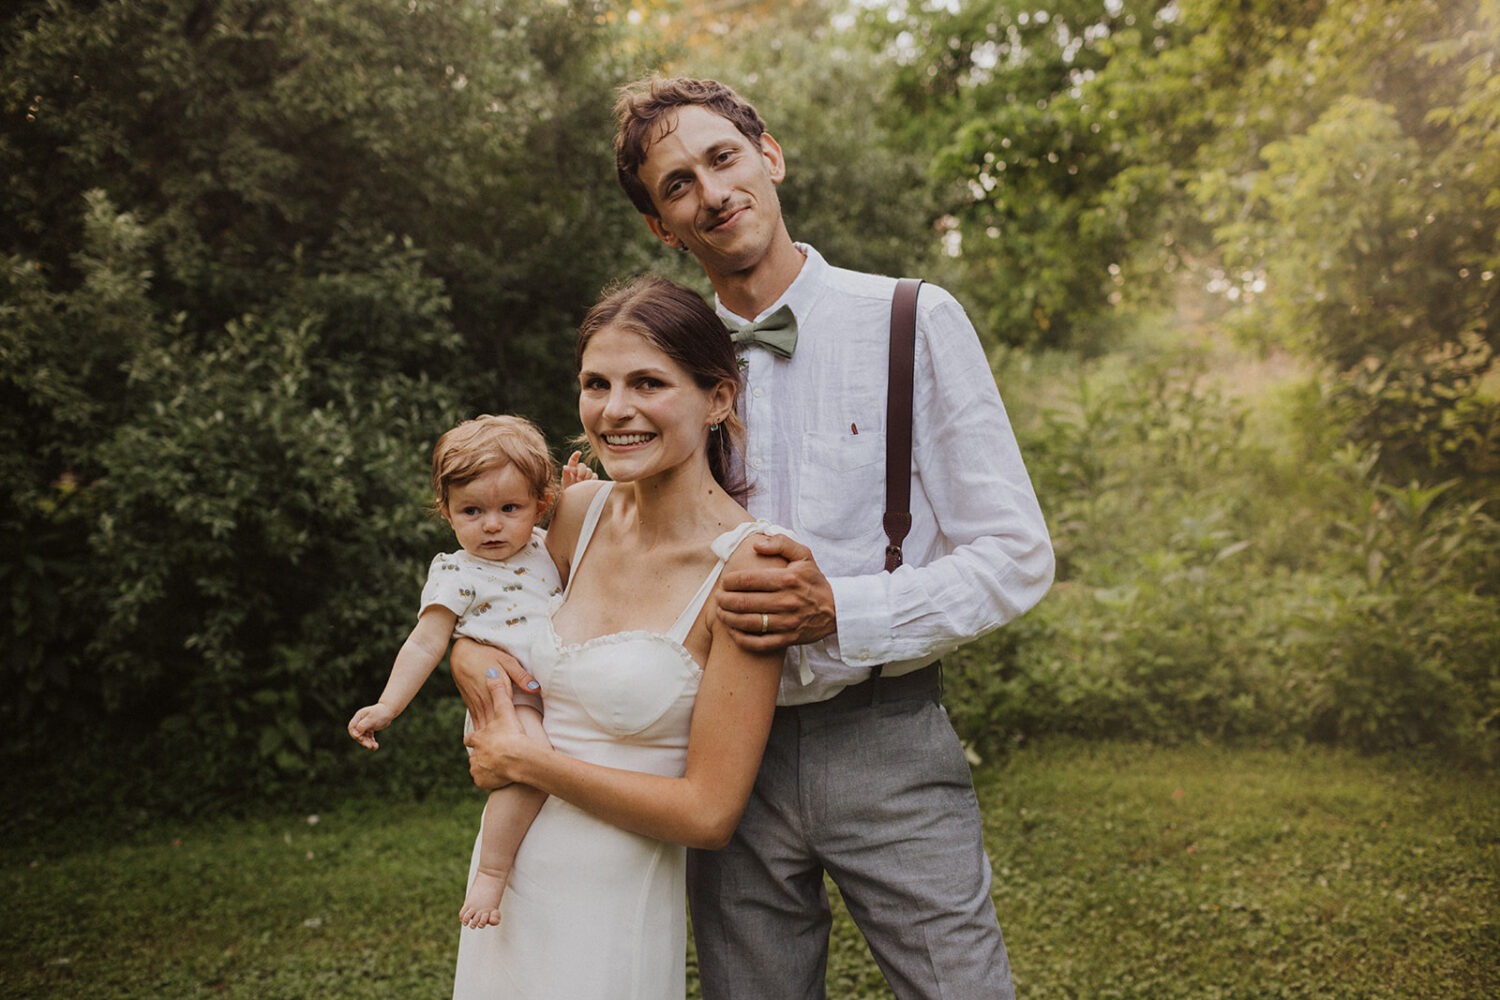 couple holds baby together at outdoor wedding